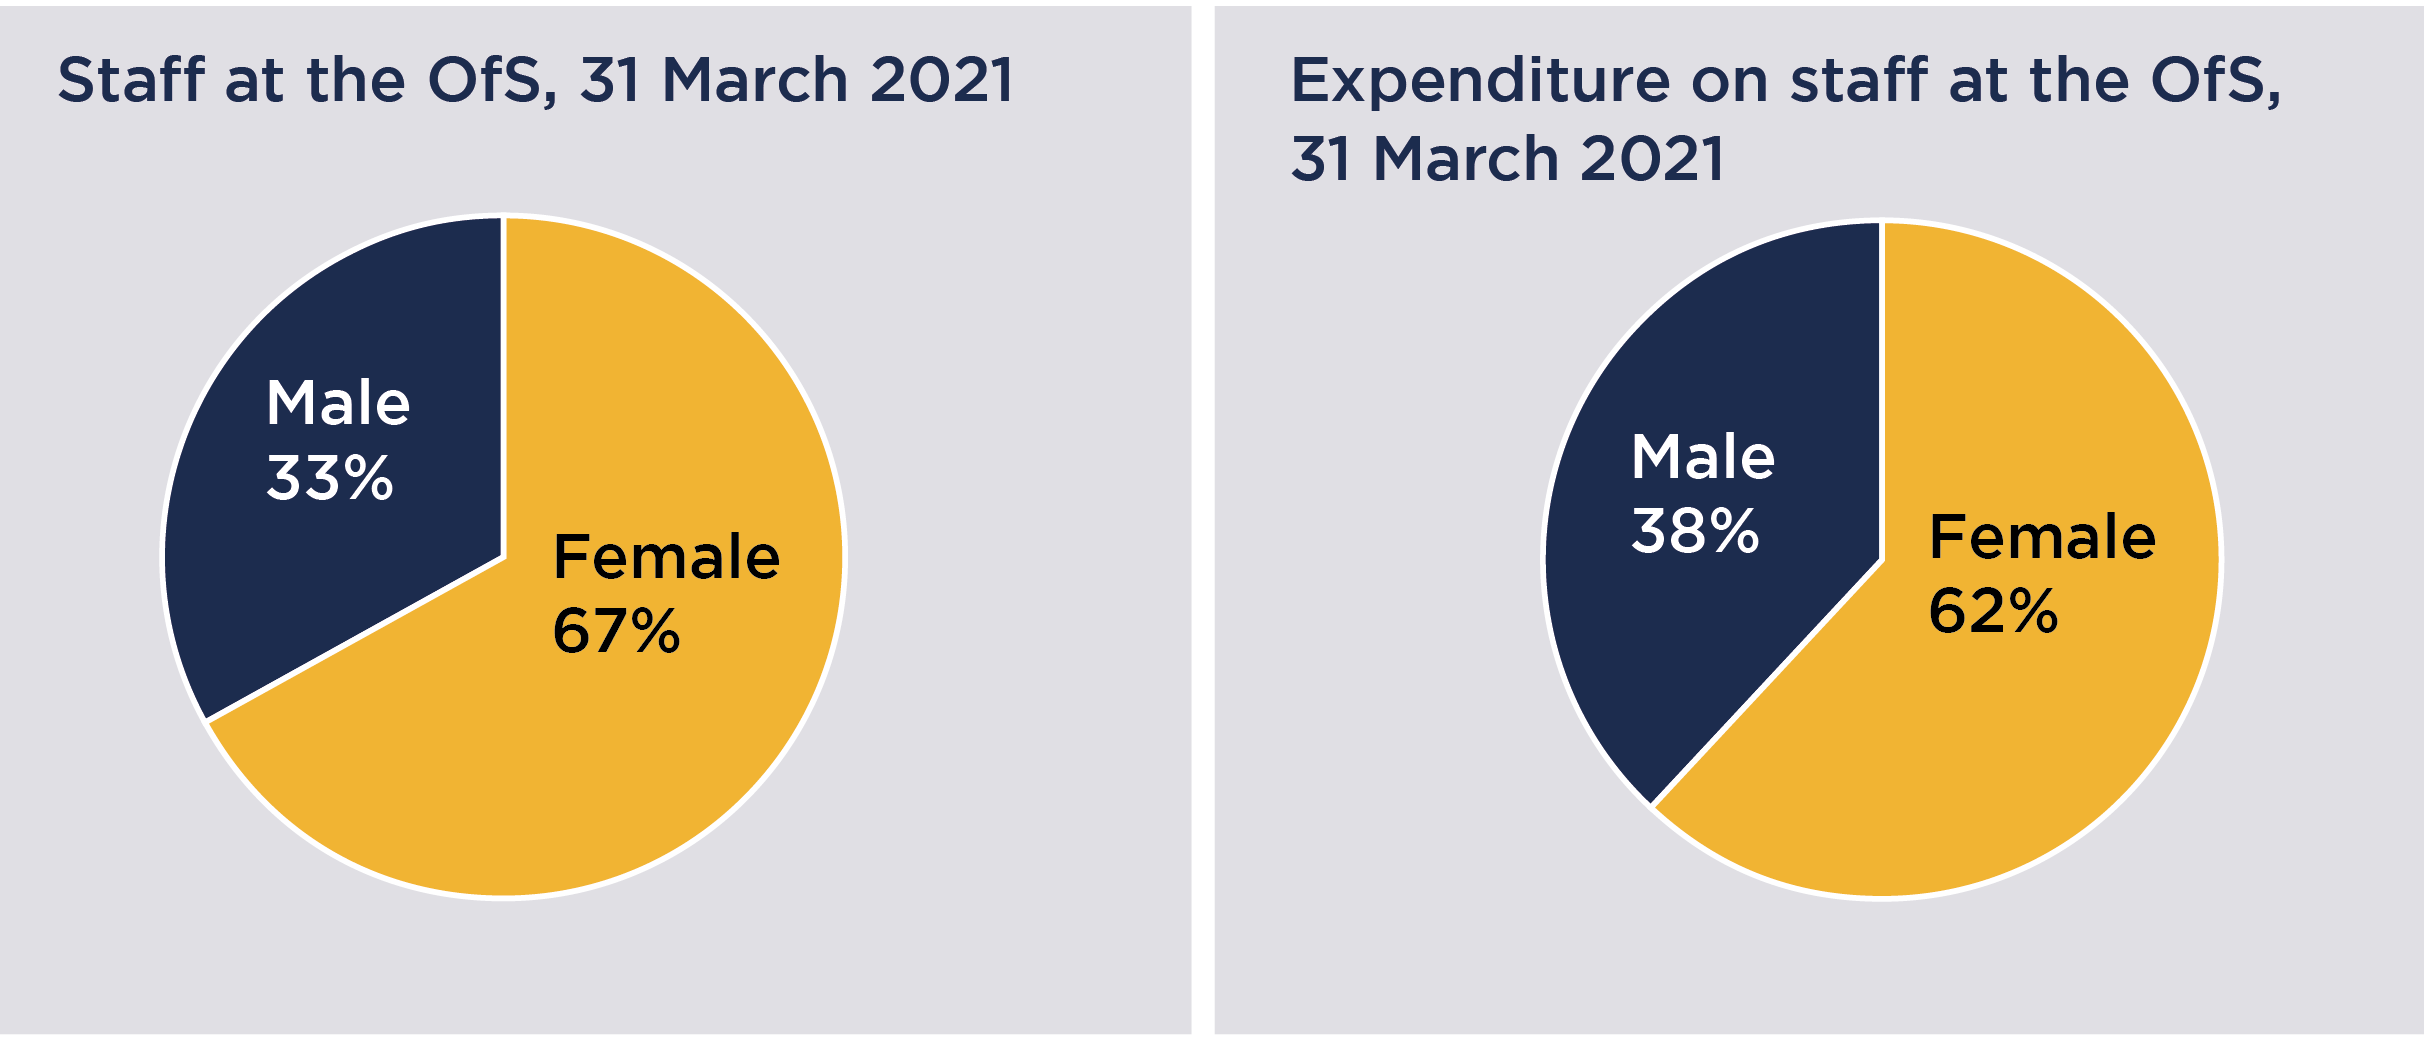 Two pie charts, both dated 31 March 2021. First chart shows staff at the OfS, male 33% and female 67%. Second chart shows expenditure on staff at the OfS. male 38% and female 62%.